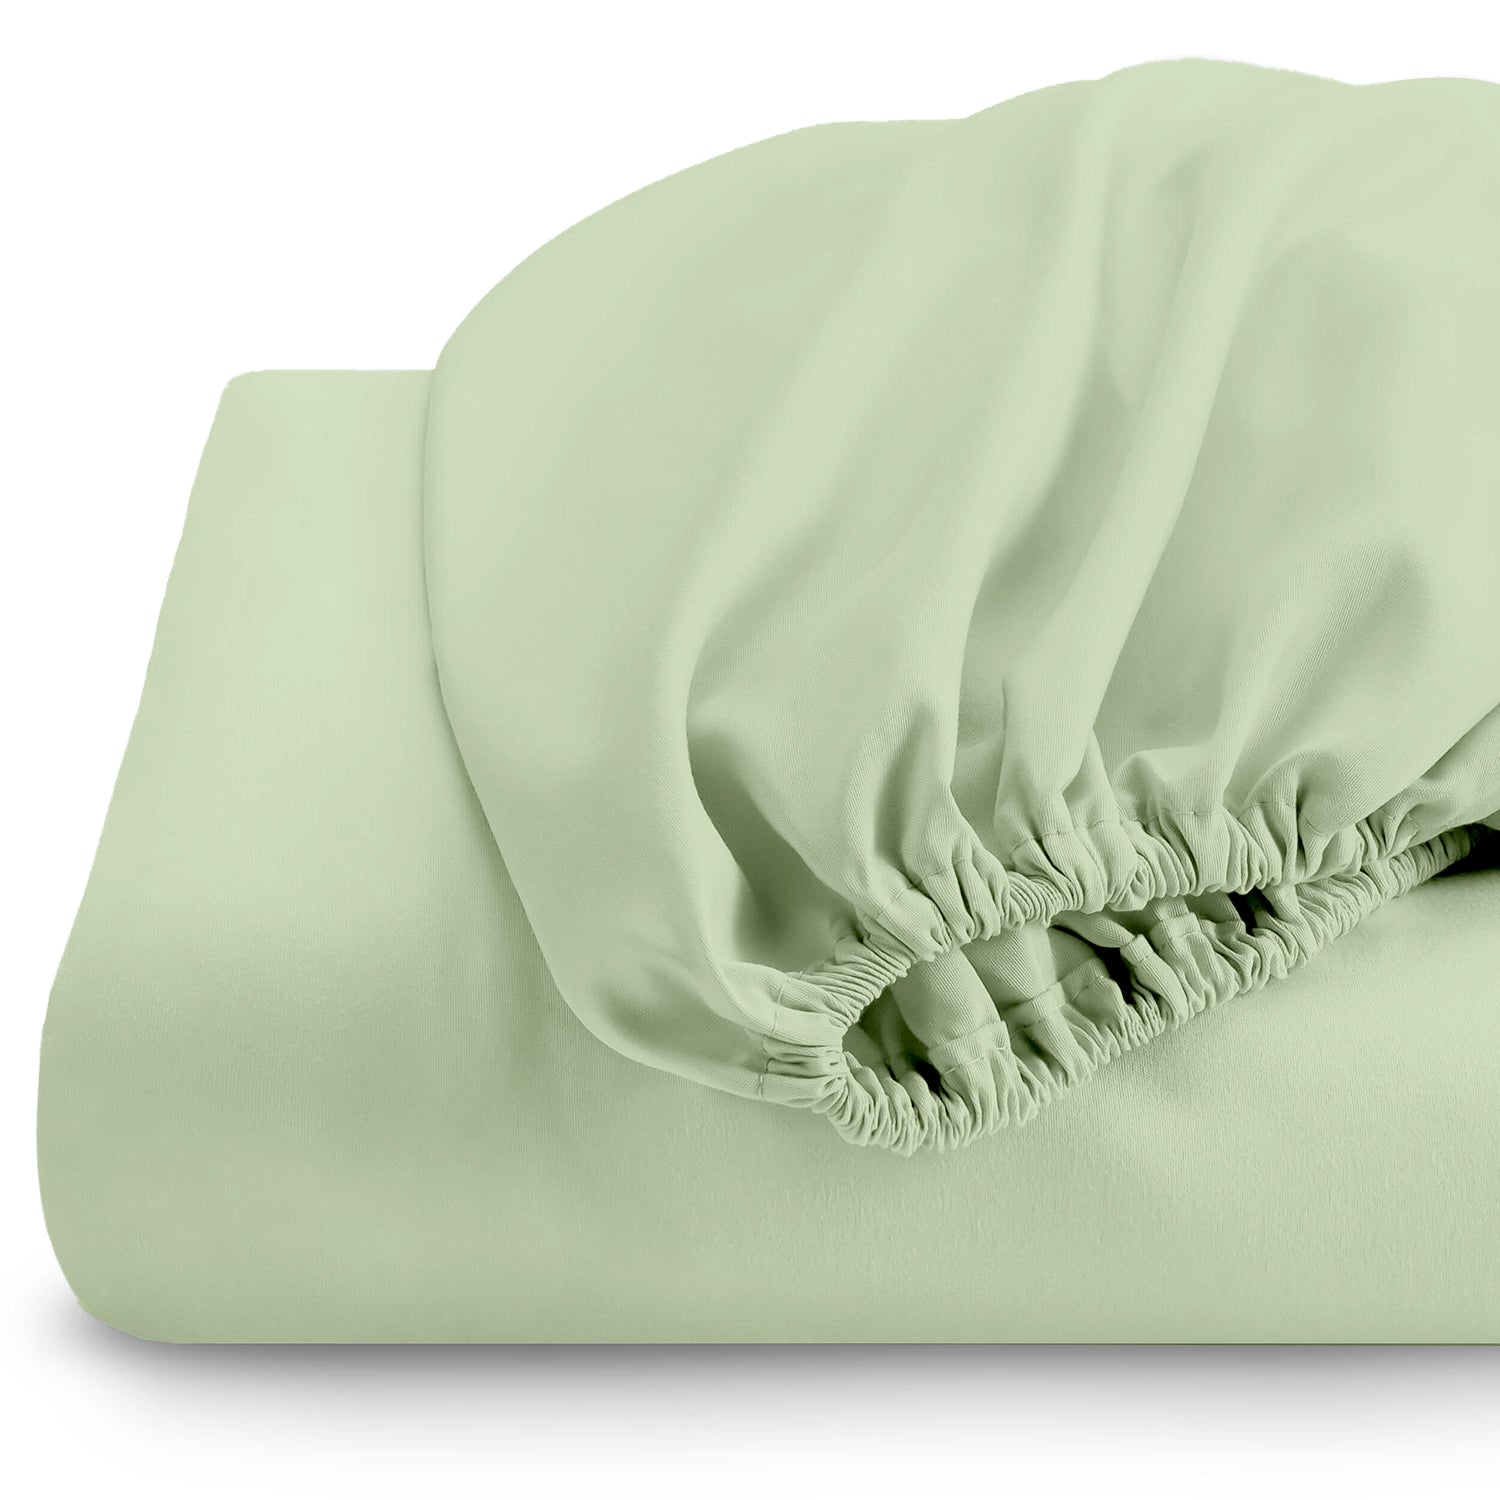 Premium Quality Super Soft Mint Green Fitted sheet 120x200+25 cm with Deep Pockets